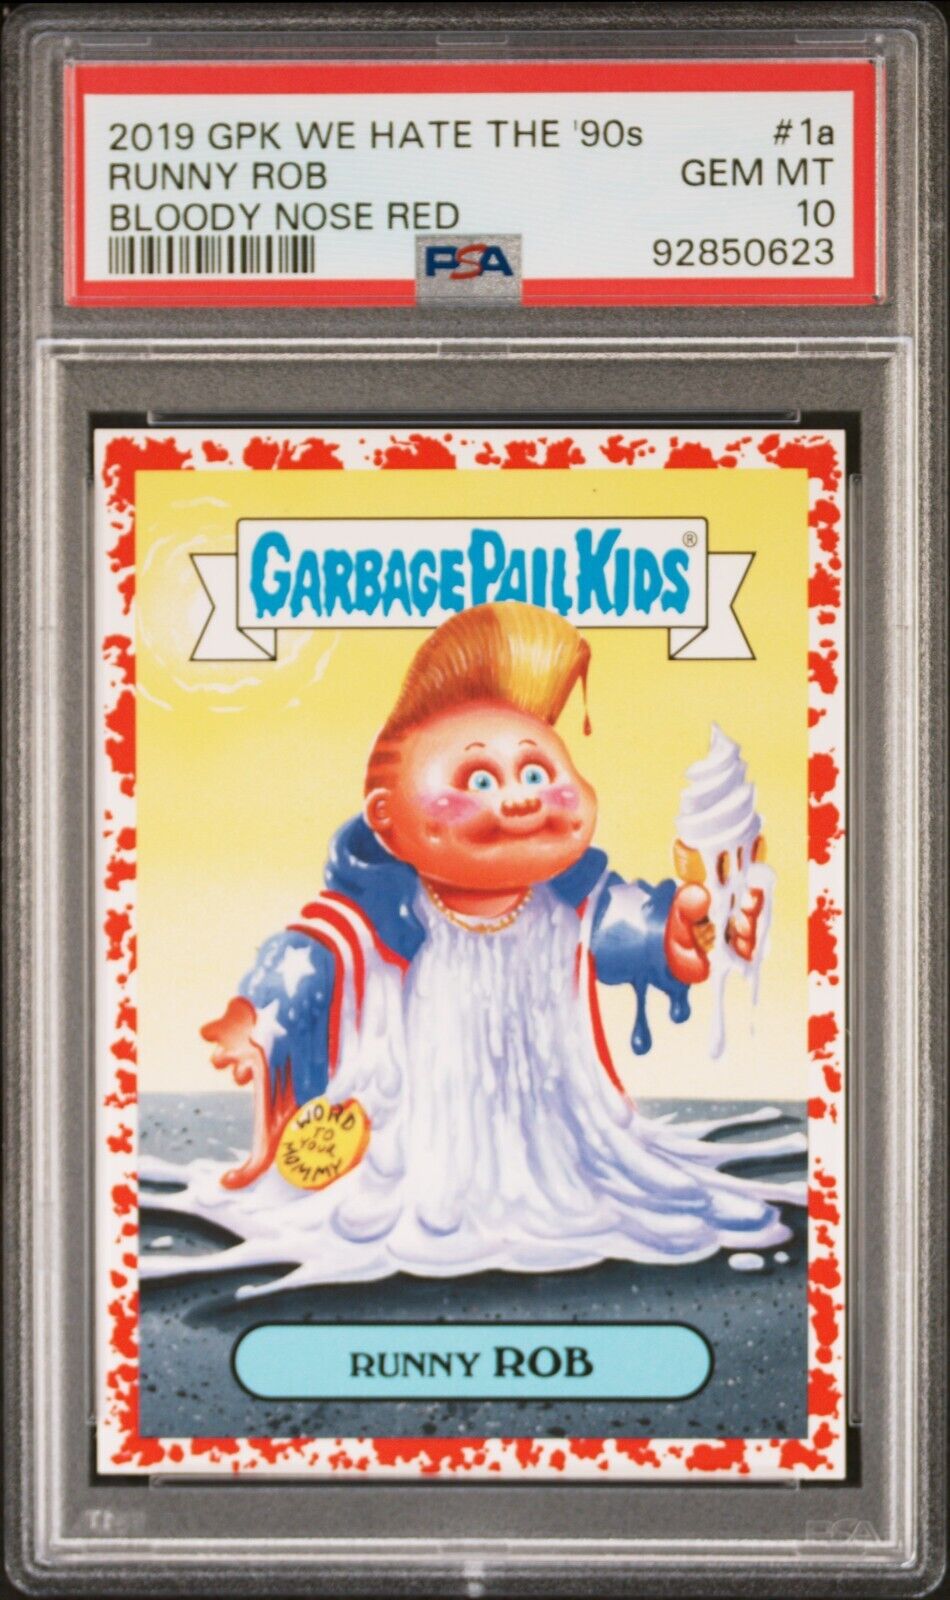 2019 Garbage Pail Kids We Hate The 90s Runny Rob Vanilla RED /75 - PSA 10 POP 1